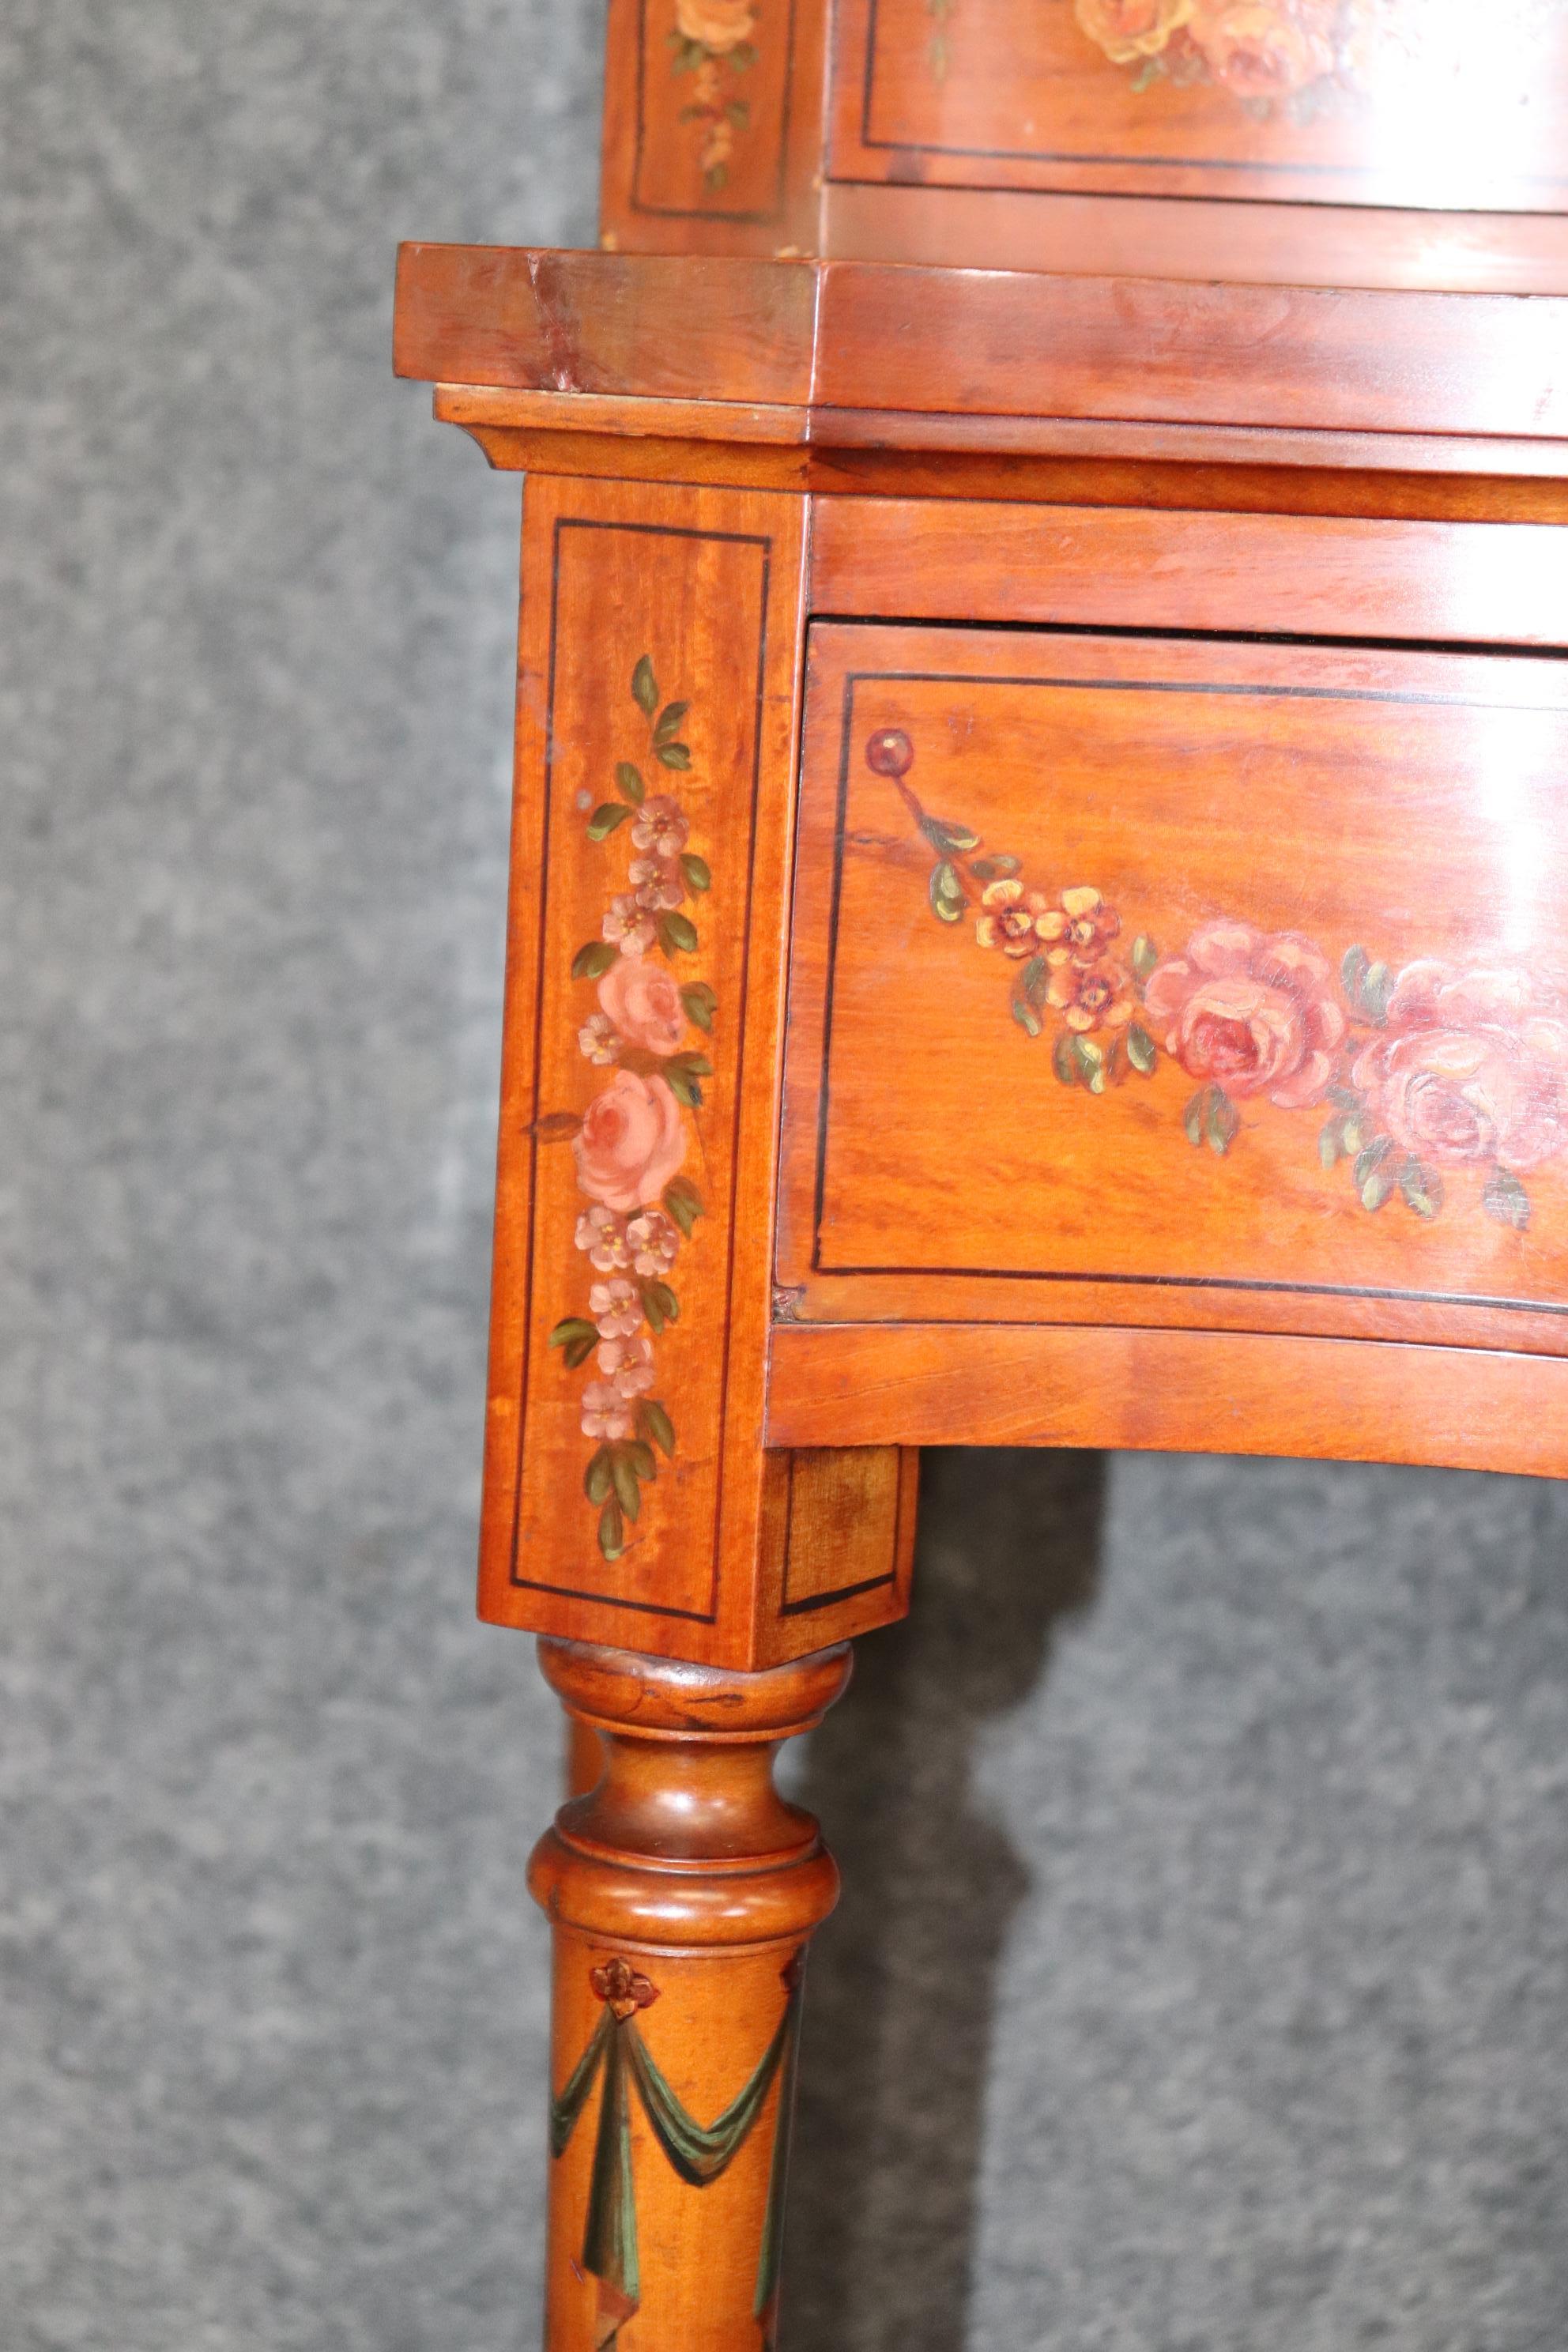 Fine Quality Gillow & Co Satinwood Paint Decorated Ladies Vanity Circa 1890s For Sale 13